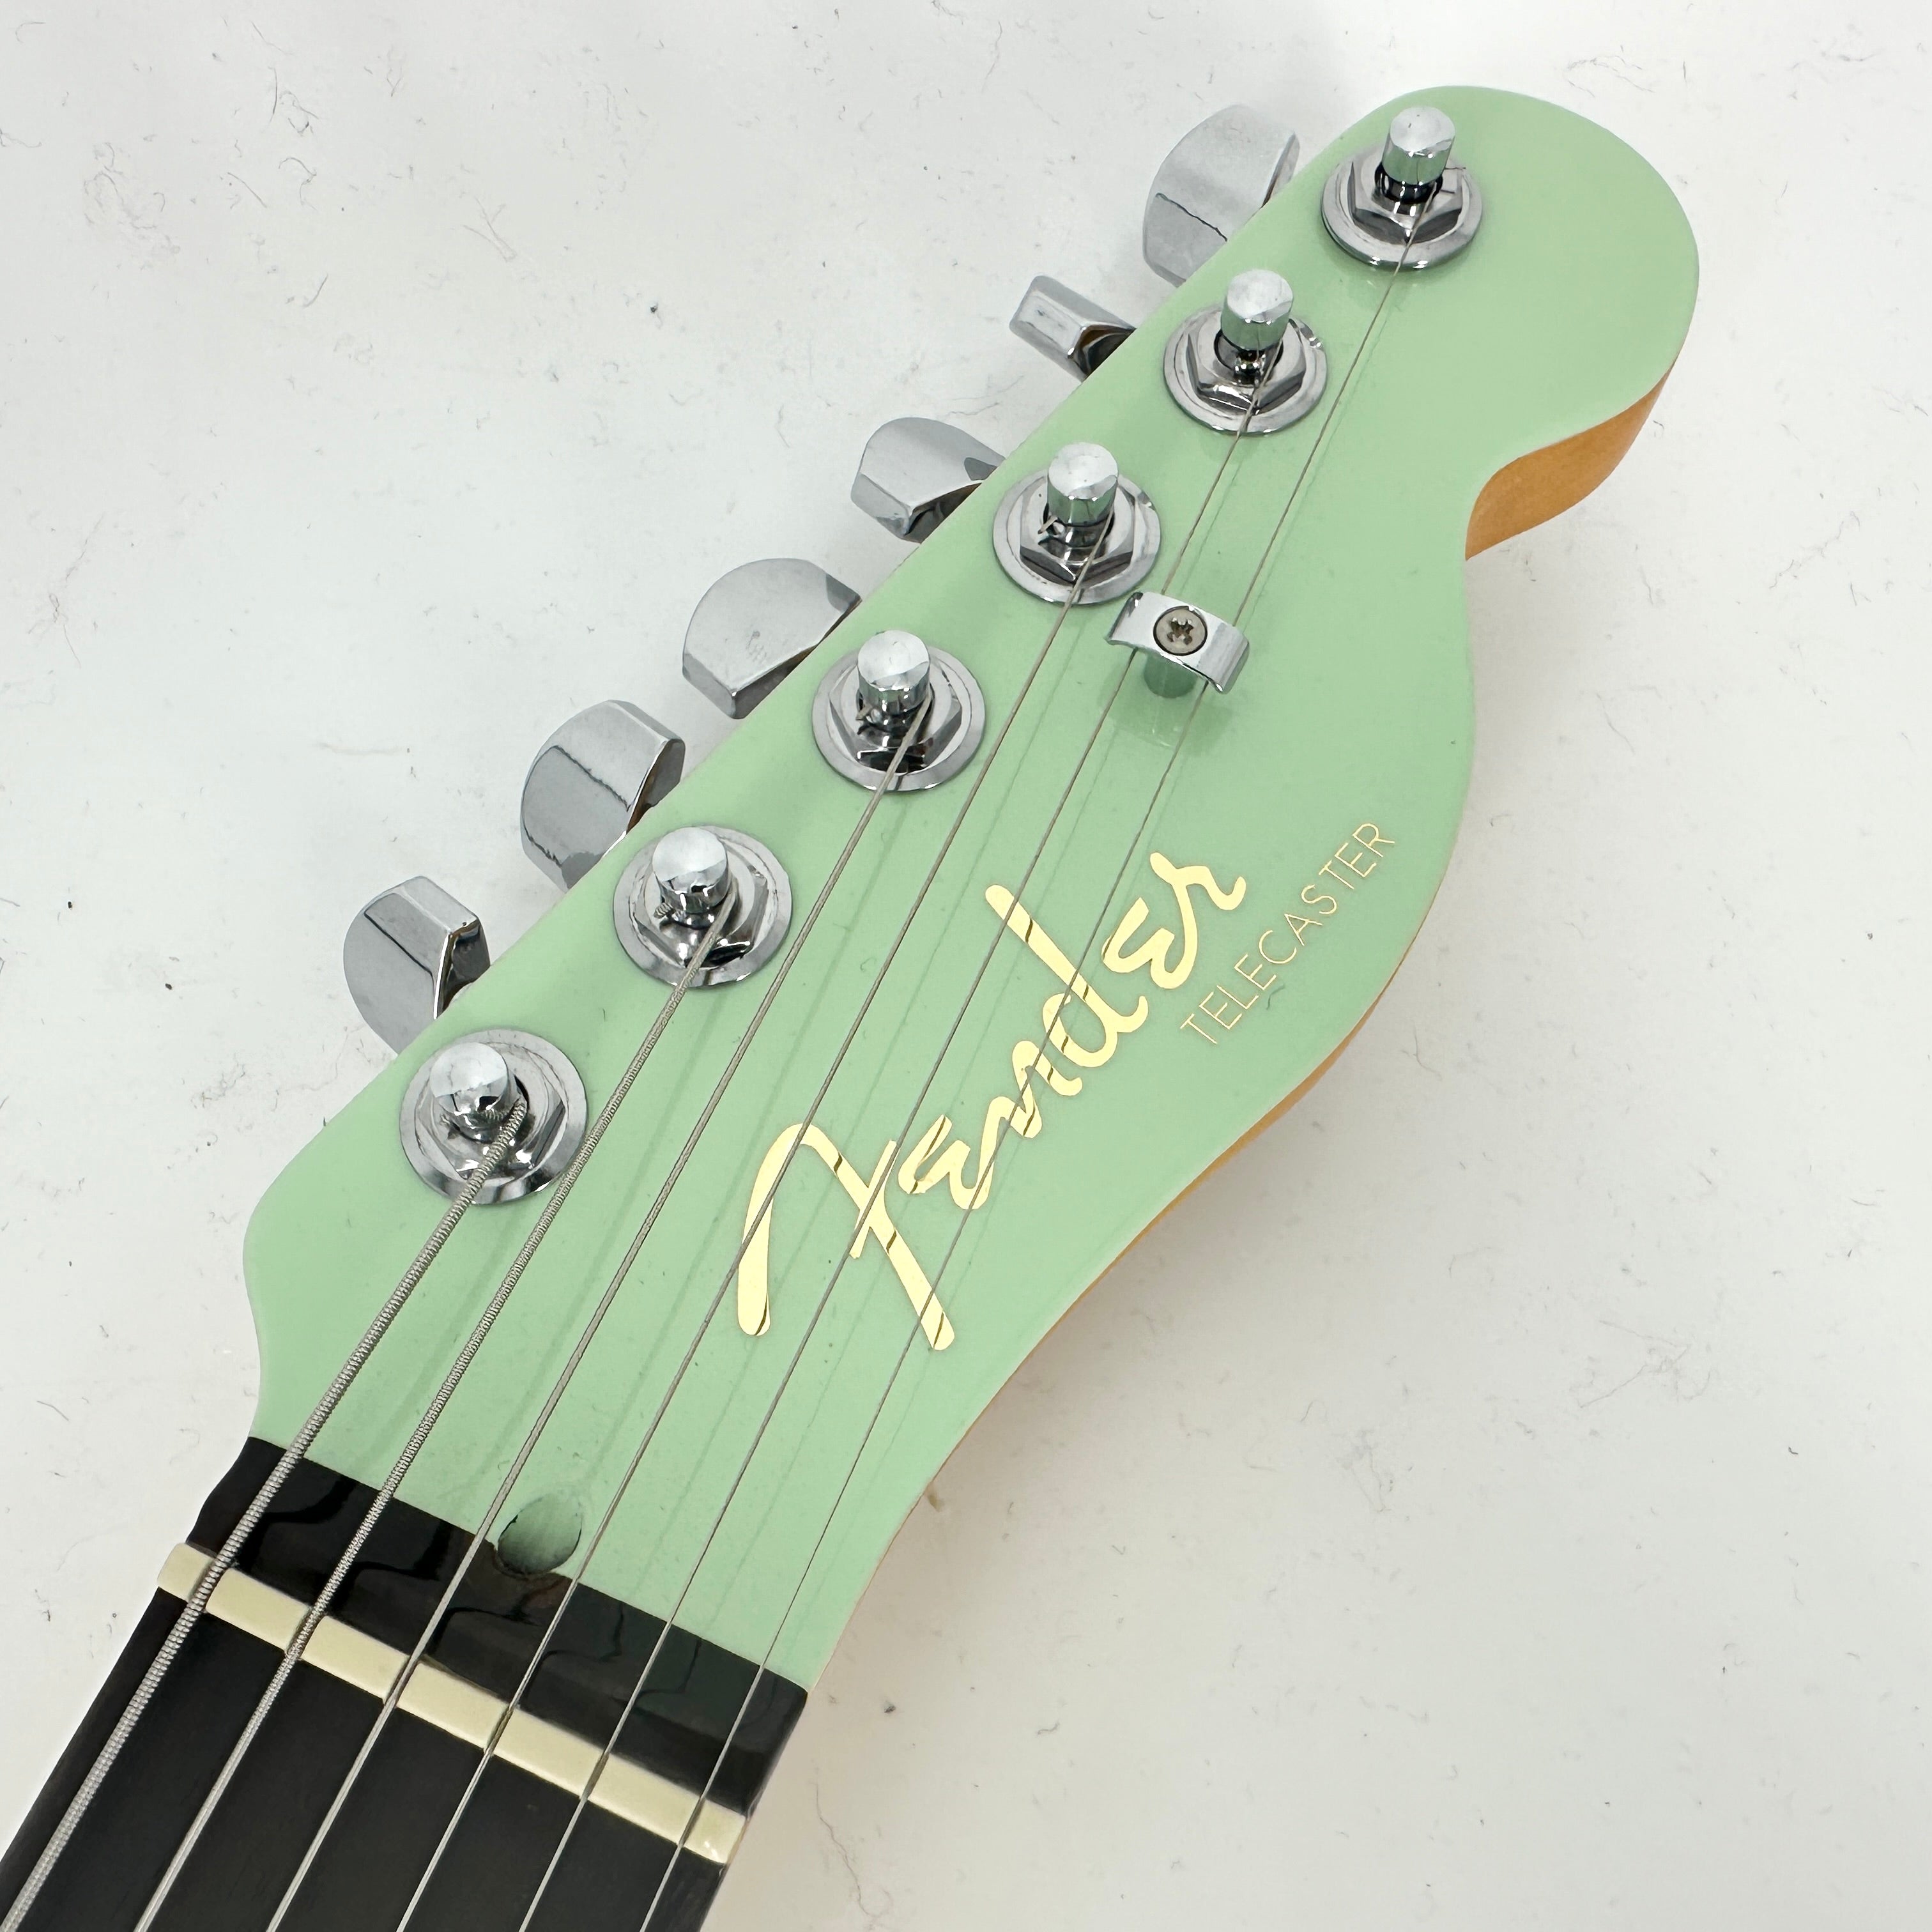 2021 Fender American Ultra Luxe Telecaster – Transparent Surf Green